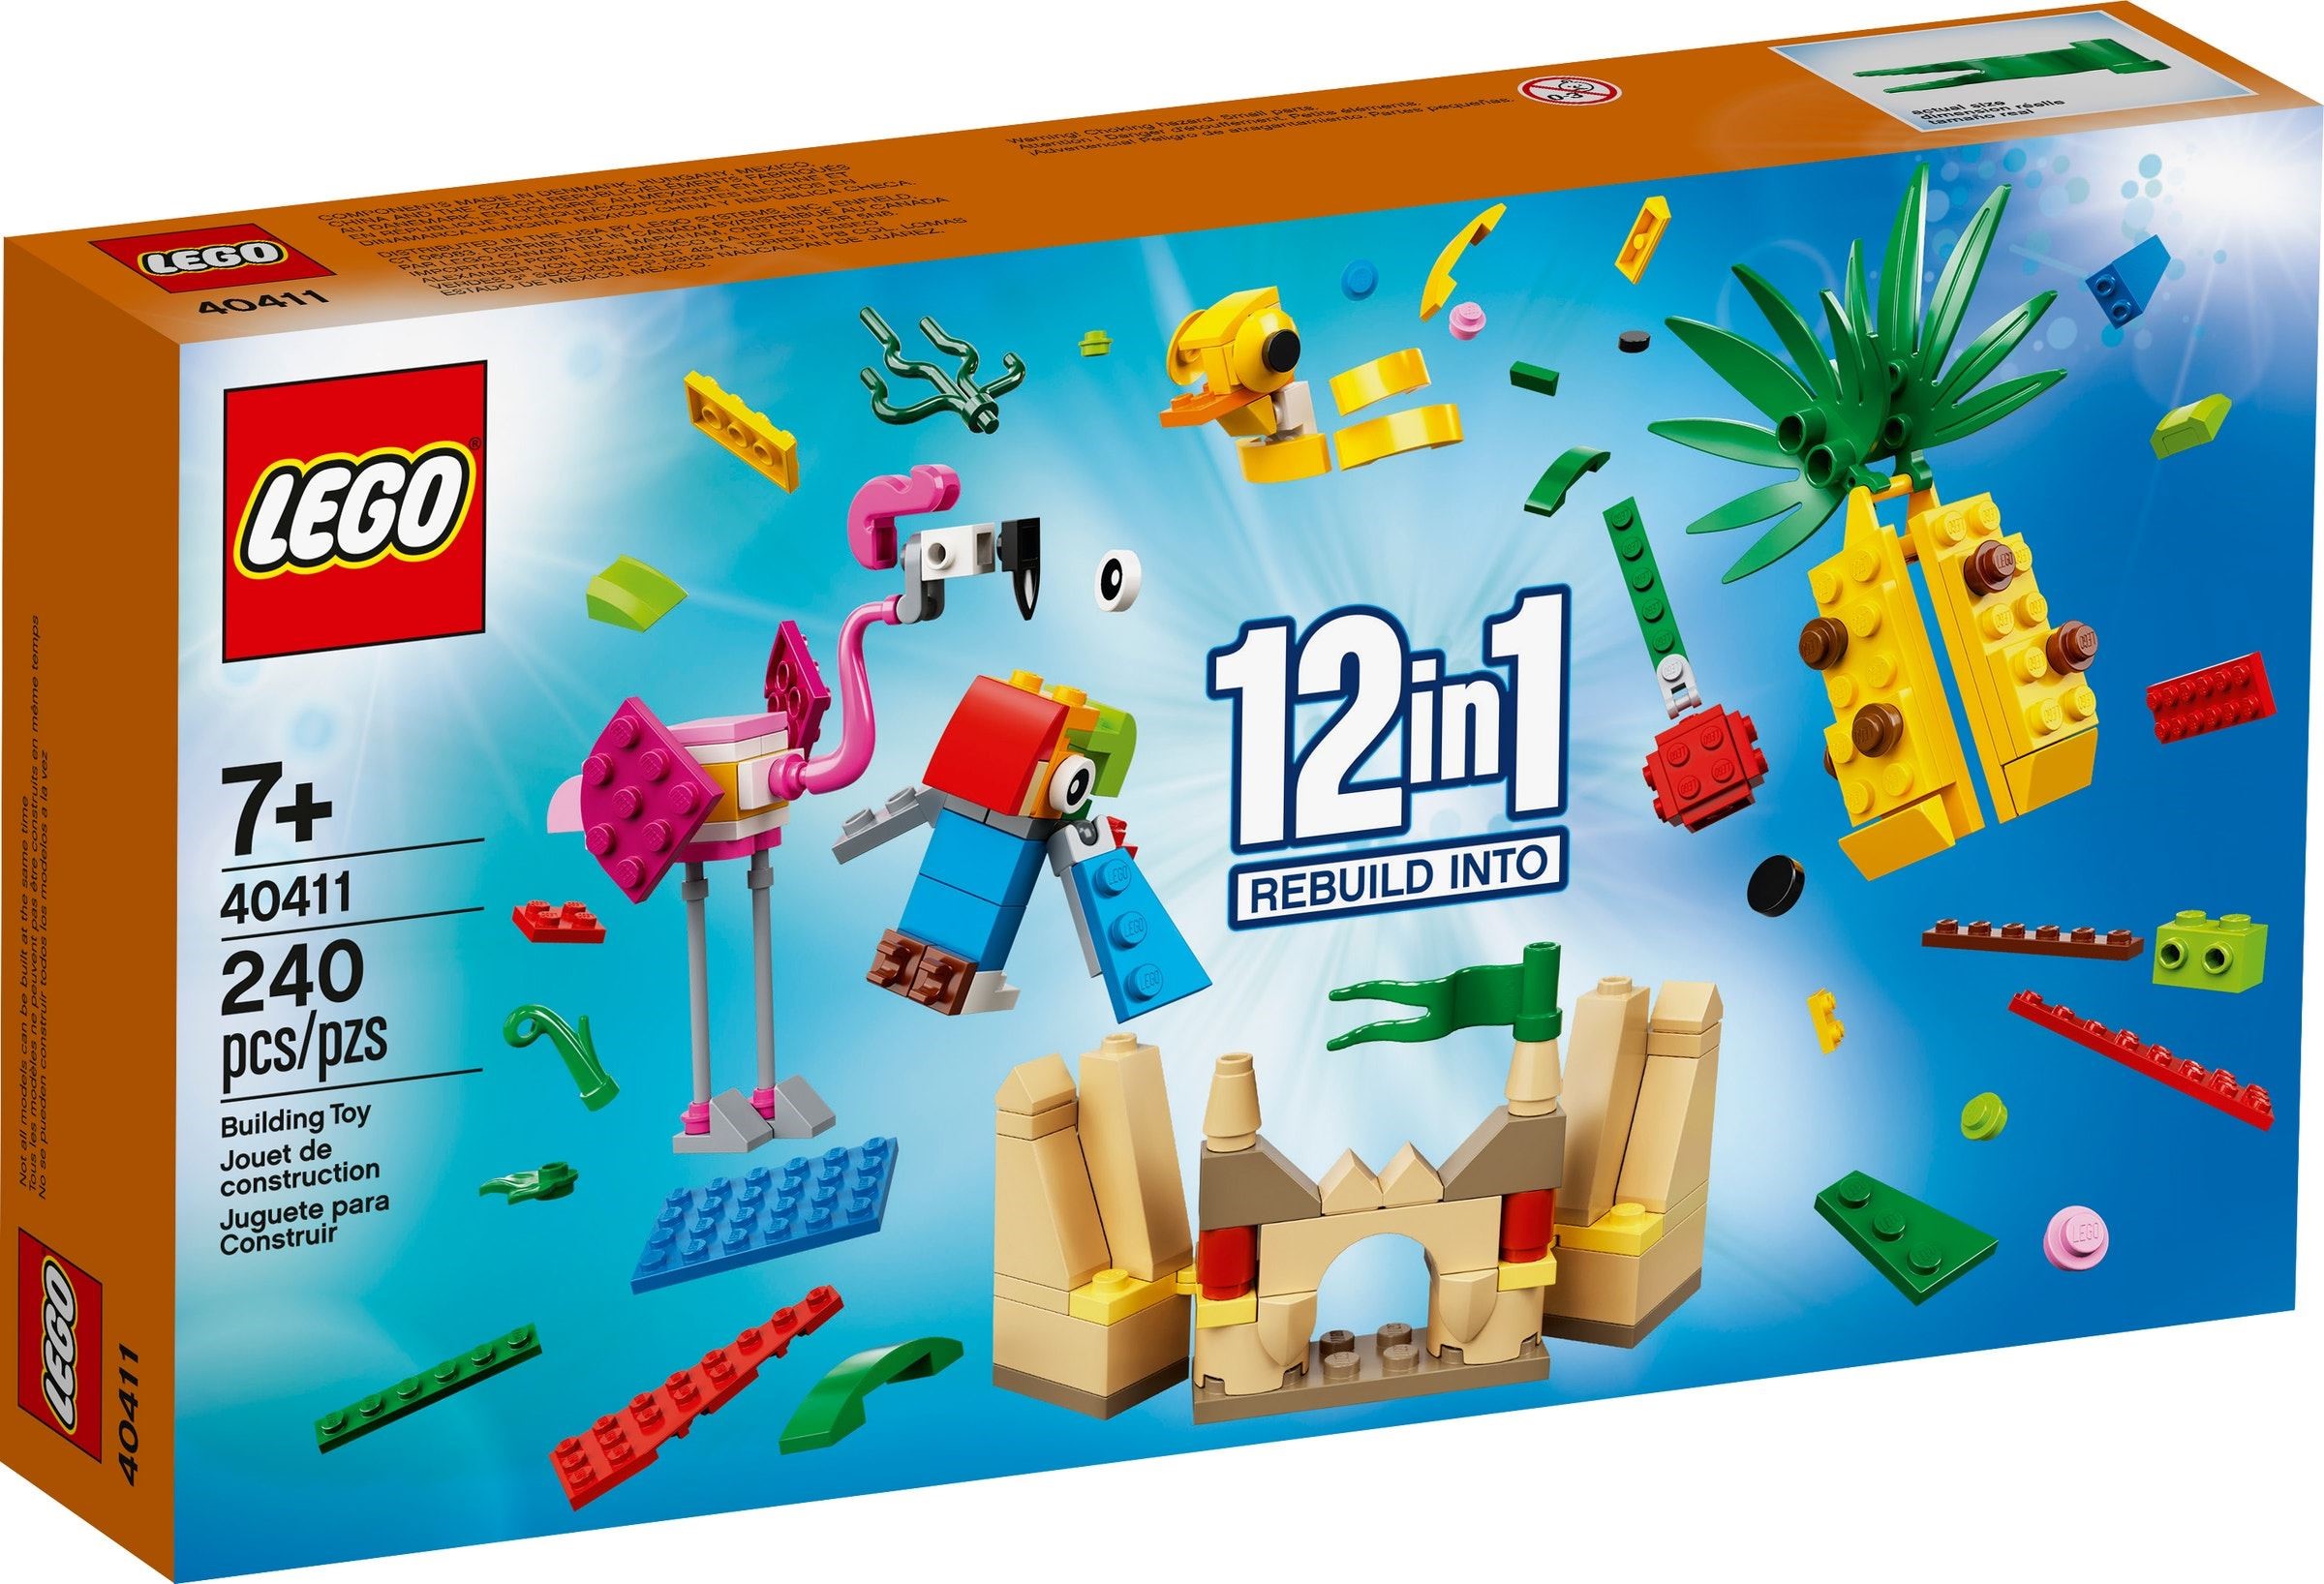 Lego Creative Fun 12 In 1 40411 Promotional Set Official Images